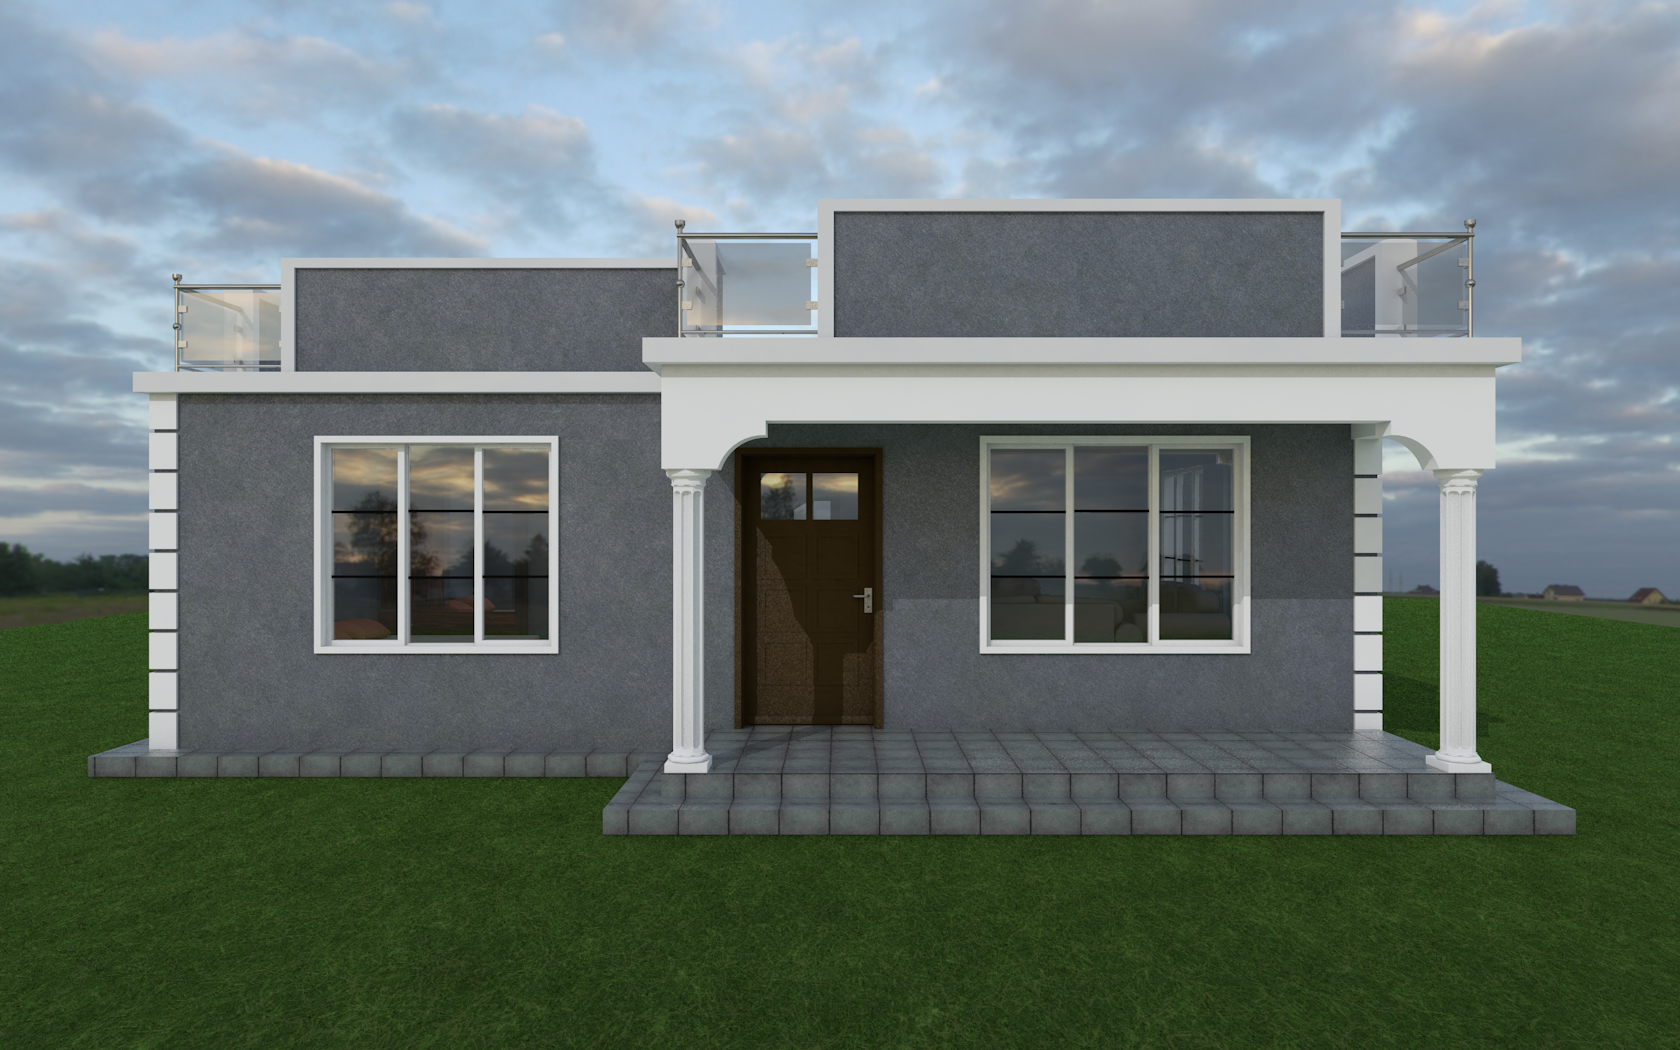 A Classy Two Bedroom Bungalow House Plan